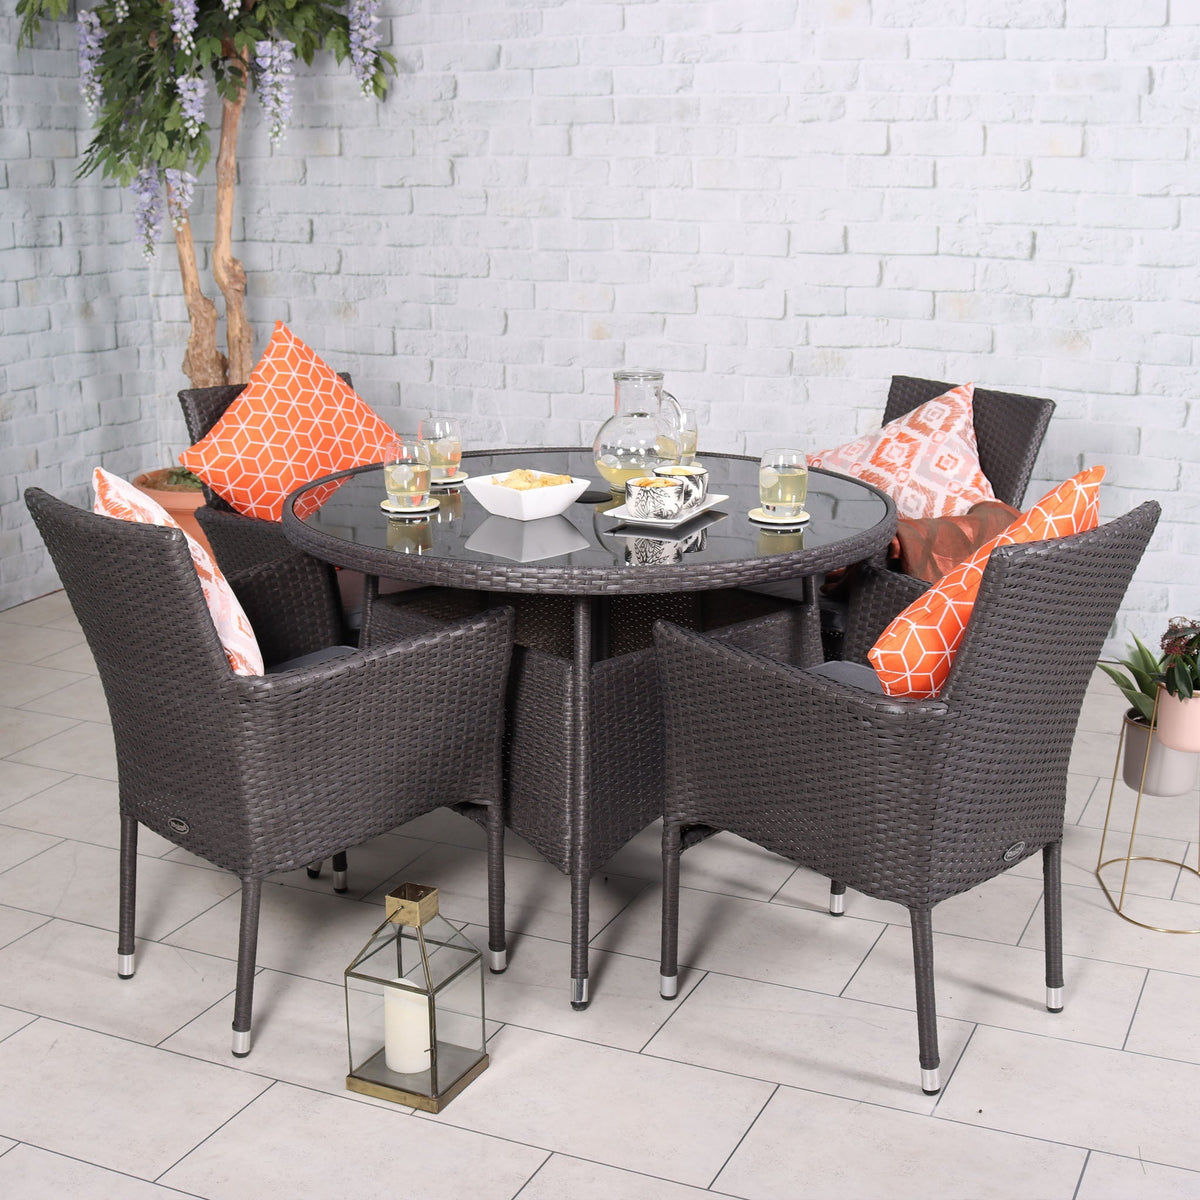 Malaga 4 Seat Deluxe Stacking 110cm Rattan Dining Set Lifestyle Setting